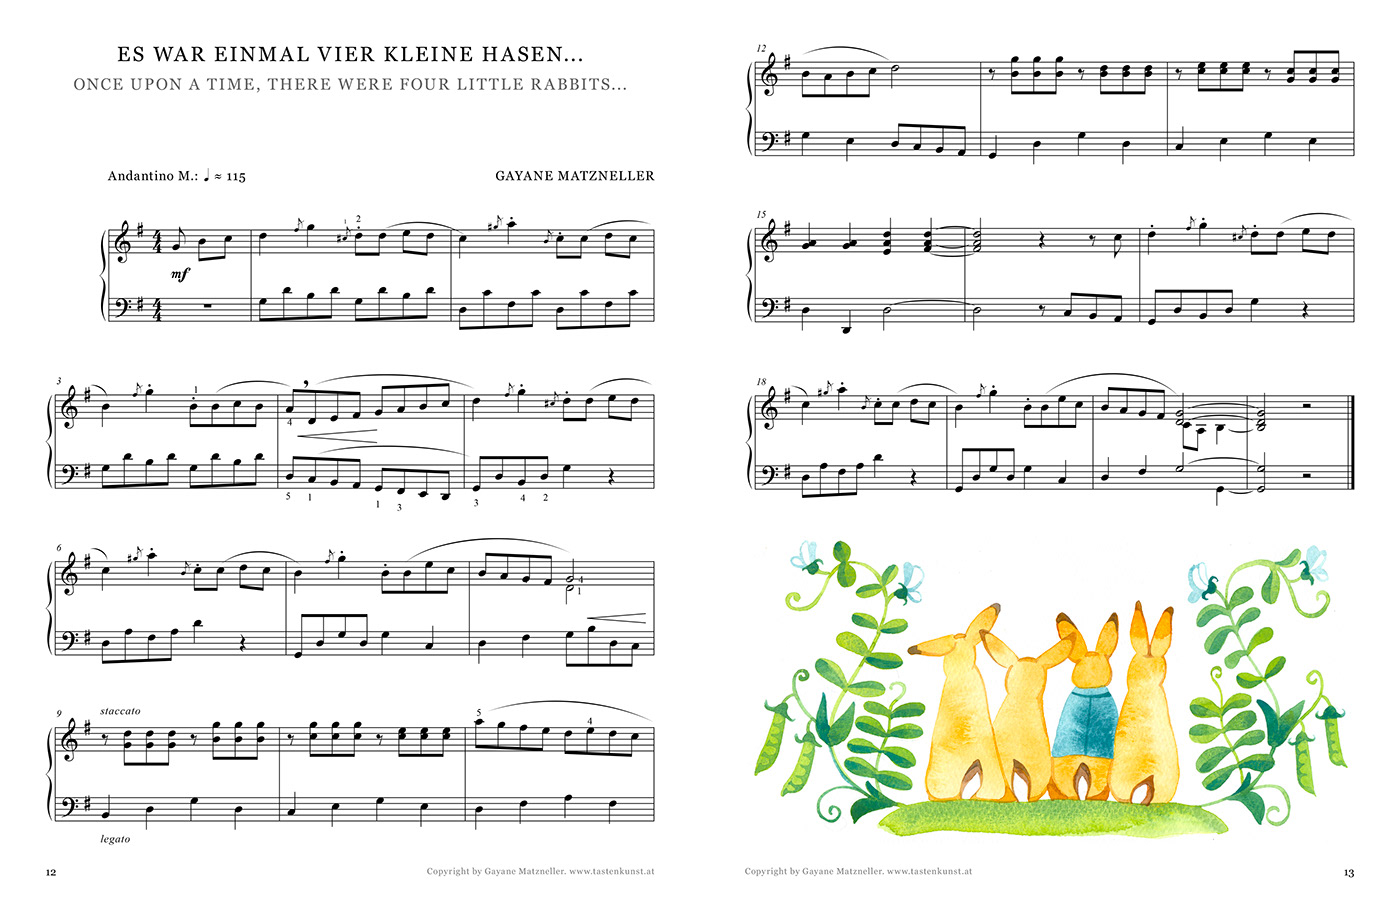 Peter Rabbit ILLUSTRATION  watercolor bunny fairytale book musical play kids Beatrix Potter piano pieces